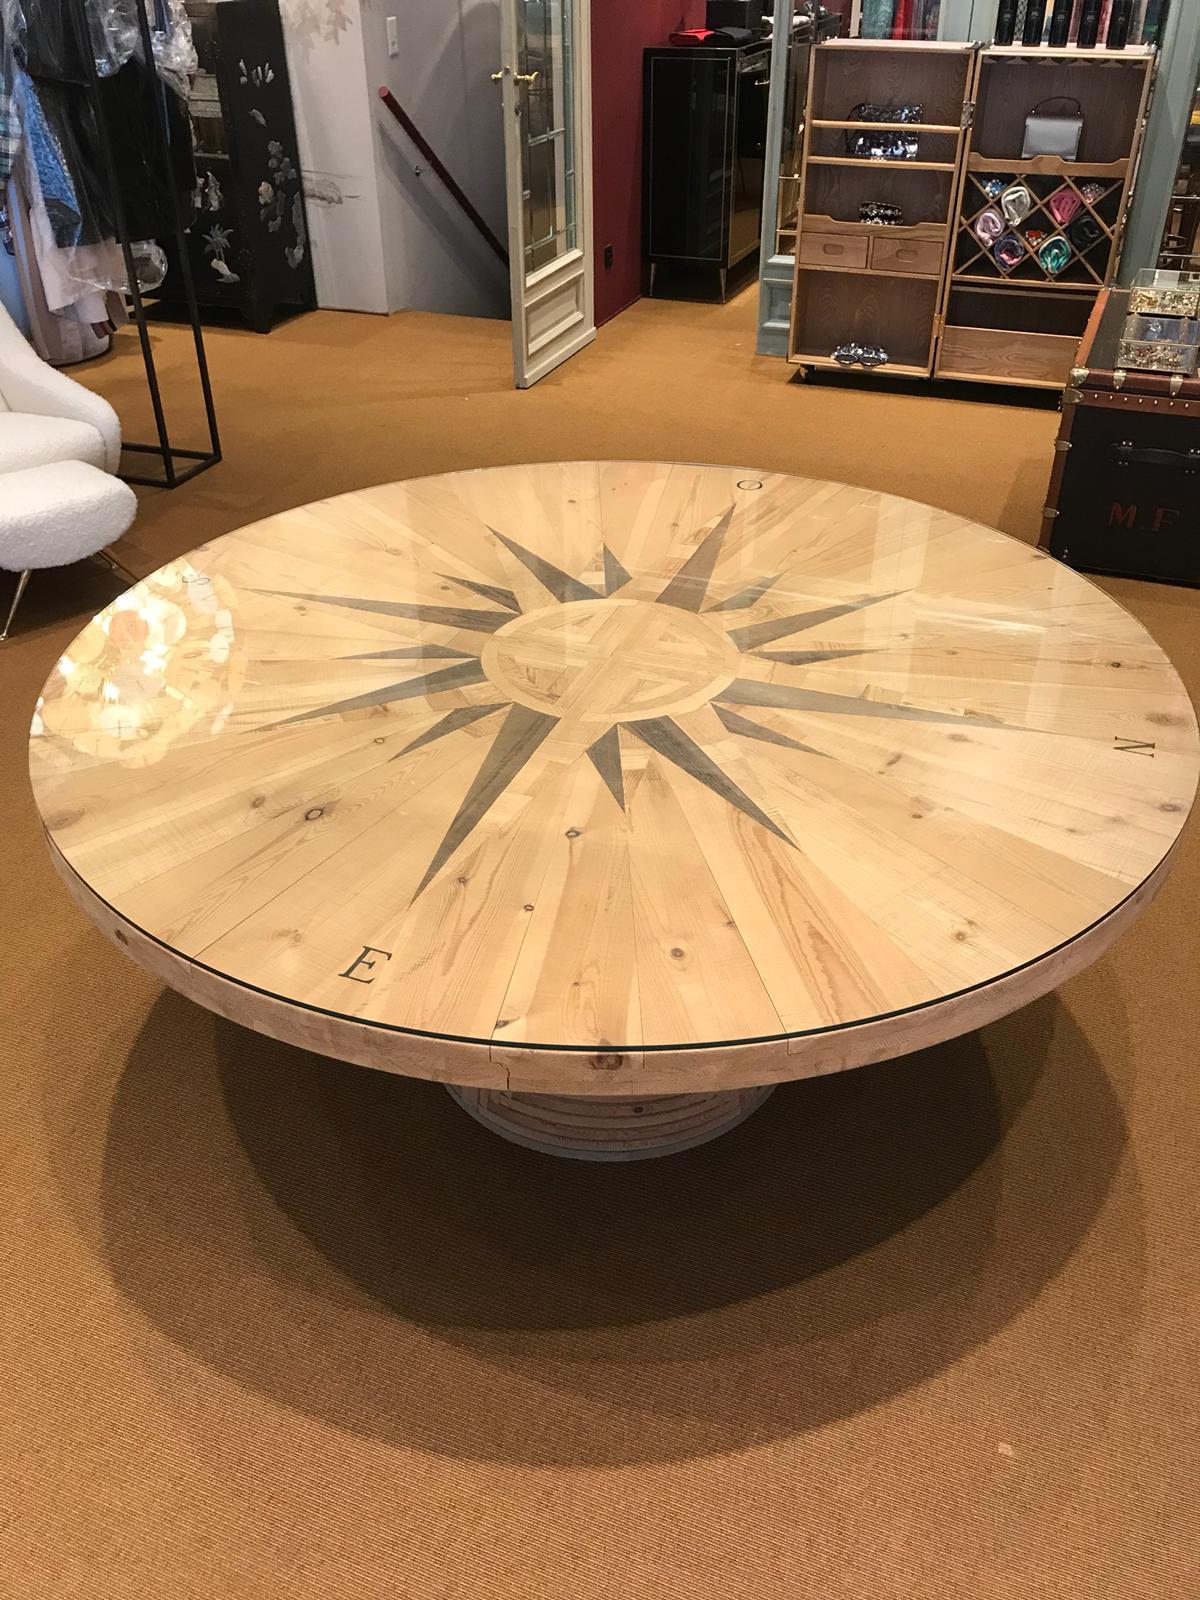 Mario Ceroli Rosa dei Venti for Poltronova, made in Italy in 1974-1975 is a timeless piece easy to use as a table for dinner or meeting room office table.
Luxurious inlaid top representing the four cardinal points, made of untreated Russian pine